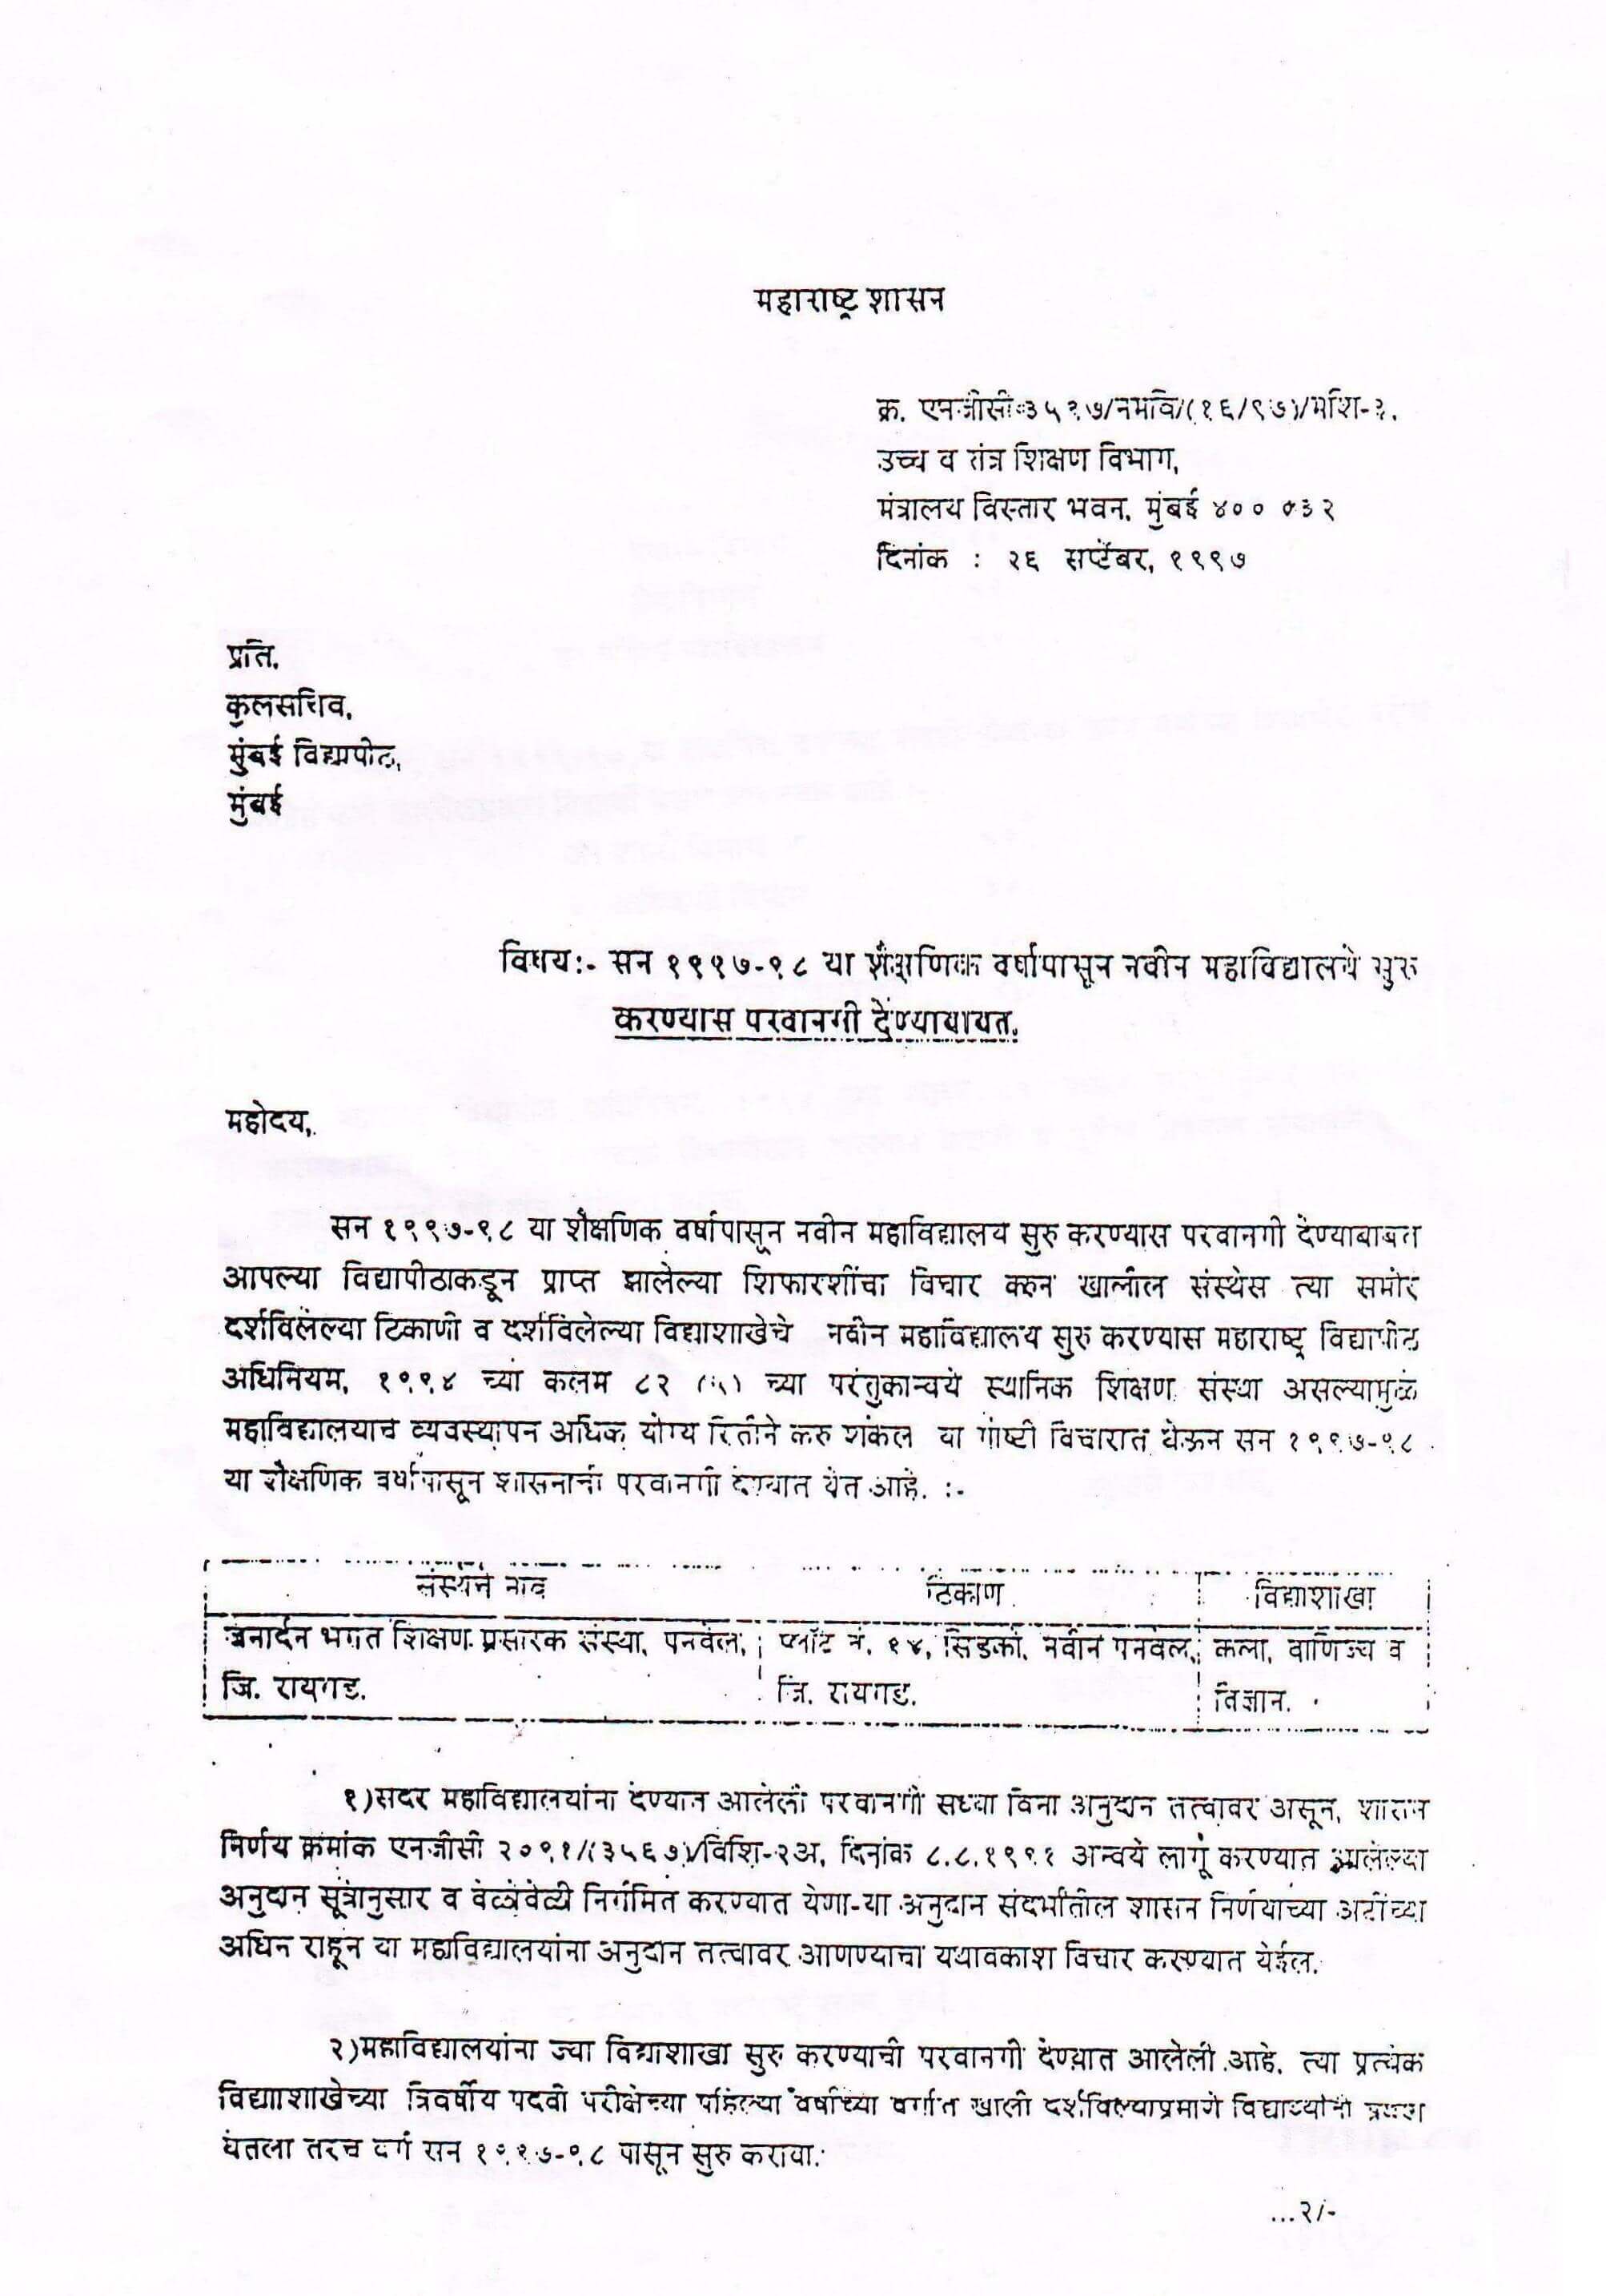 Permission Letter by Government of Maharashtra